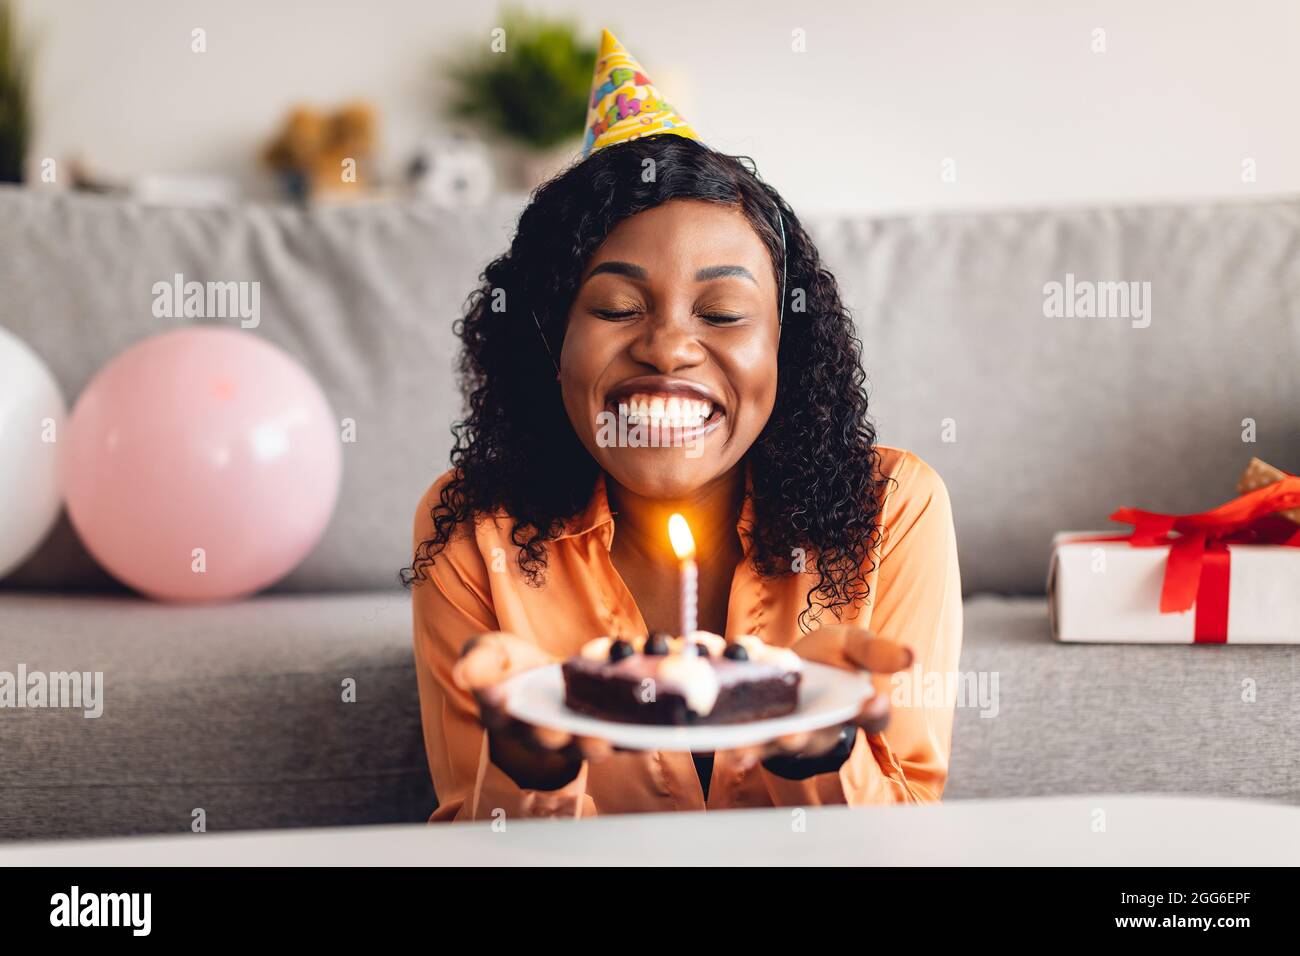 birthday poses to try with cake 😘🎂 | Gallery posted by gisele rei! |  Lemon8-demhanvico.com.vn